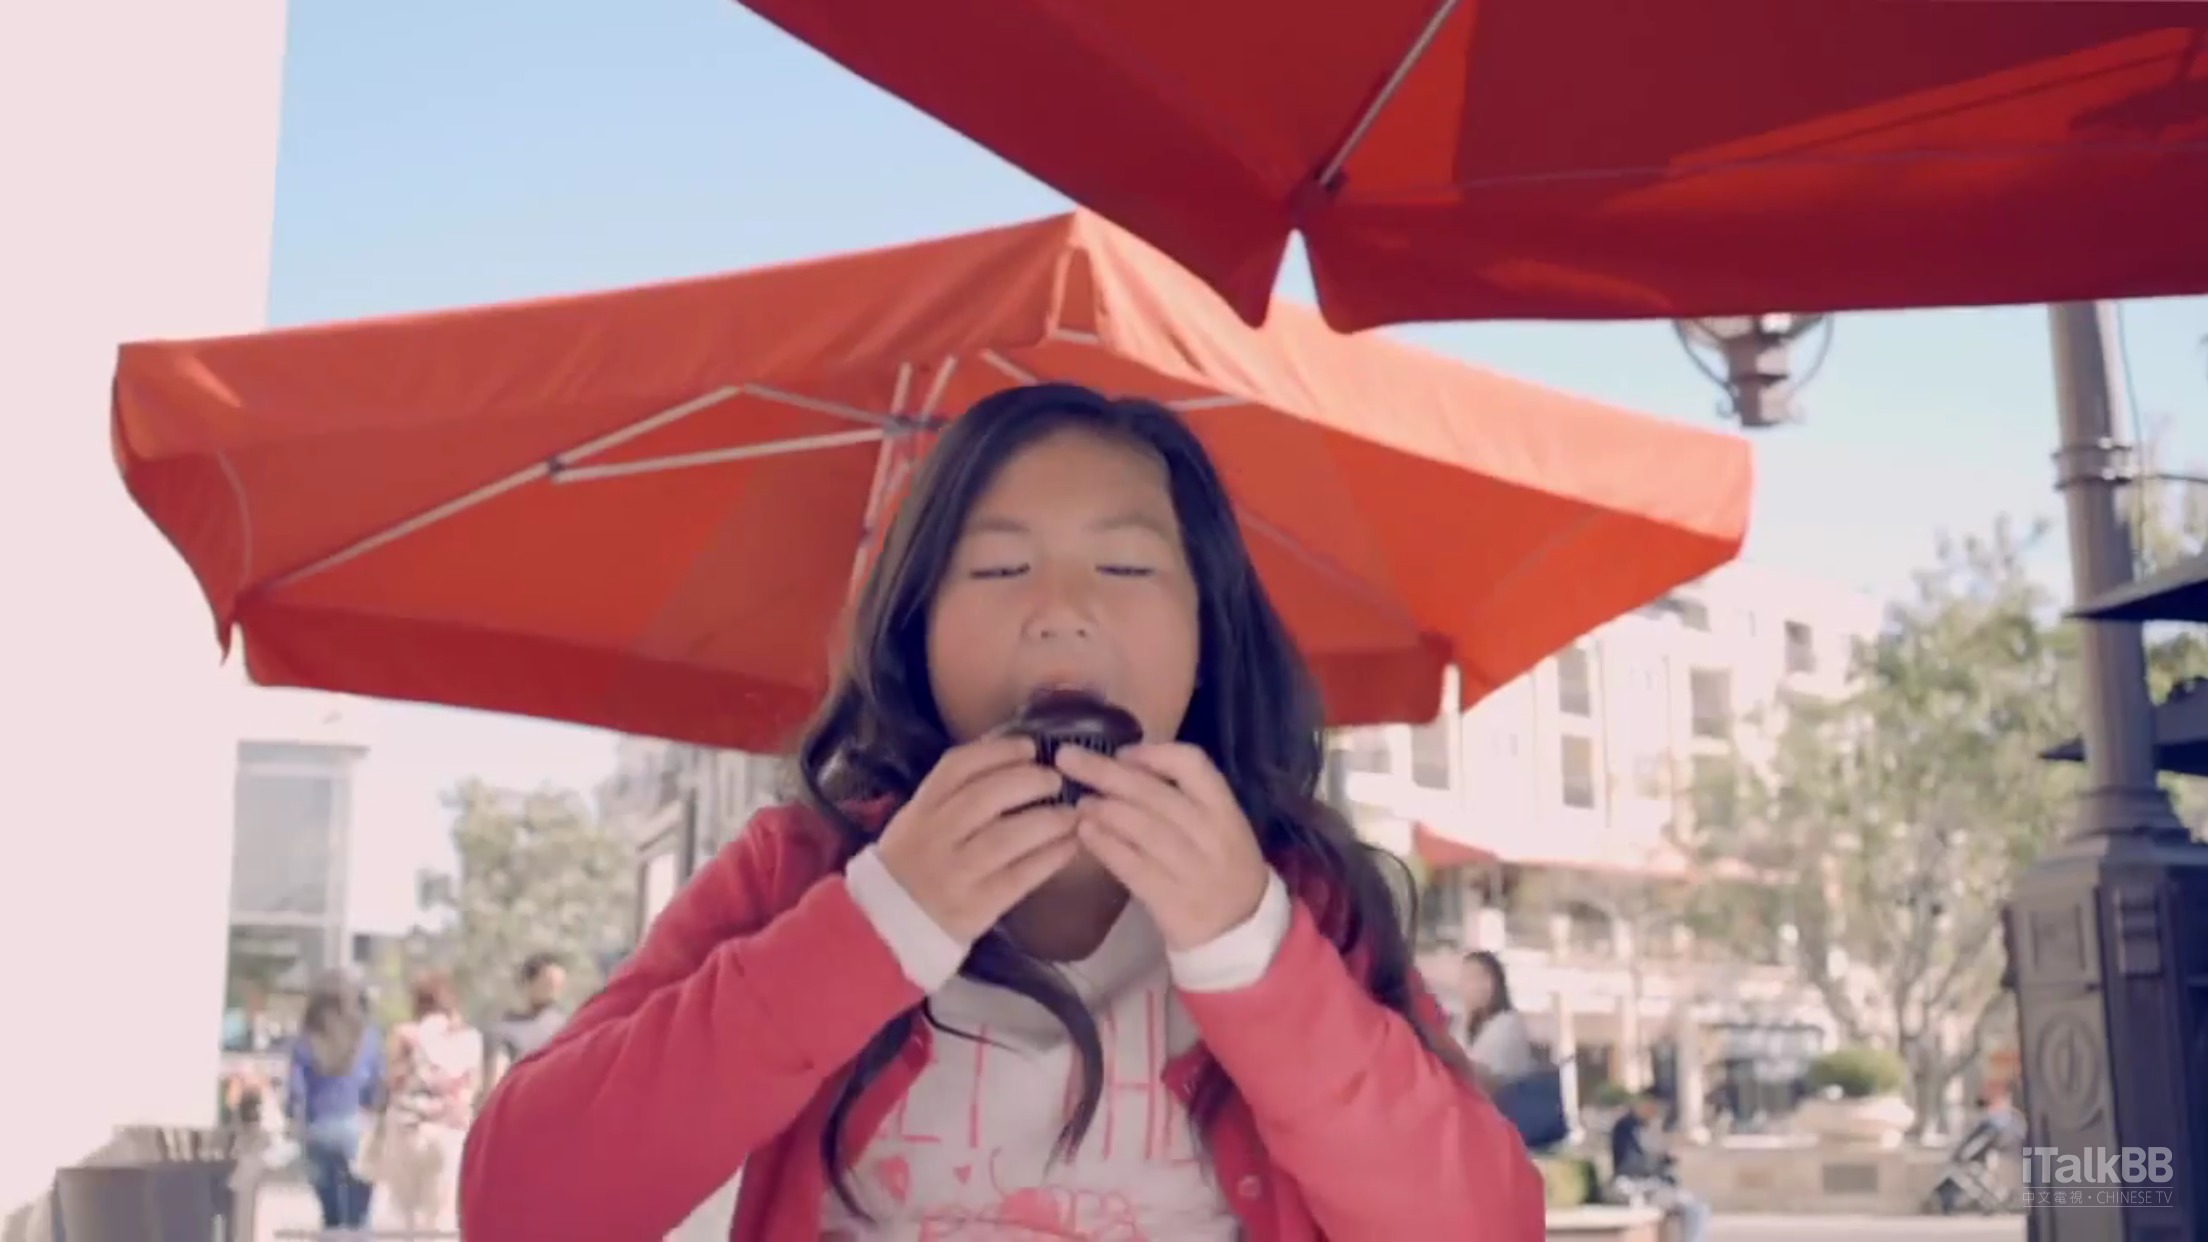 ItalkBB commercial for Sprinkles and America at Brand